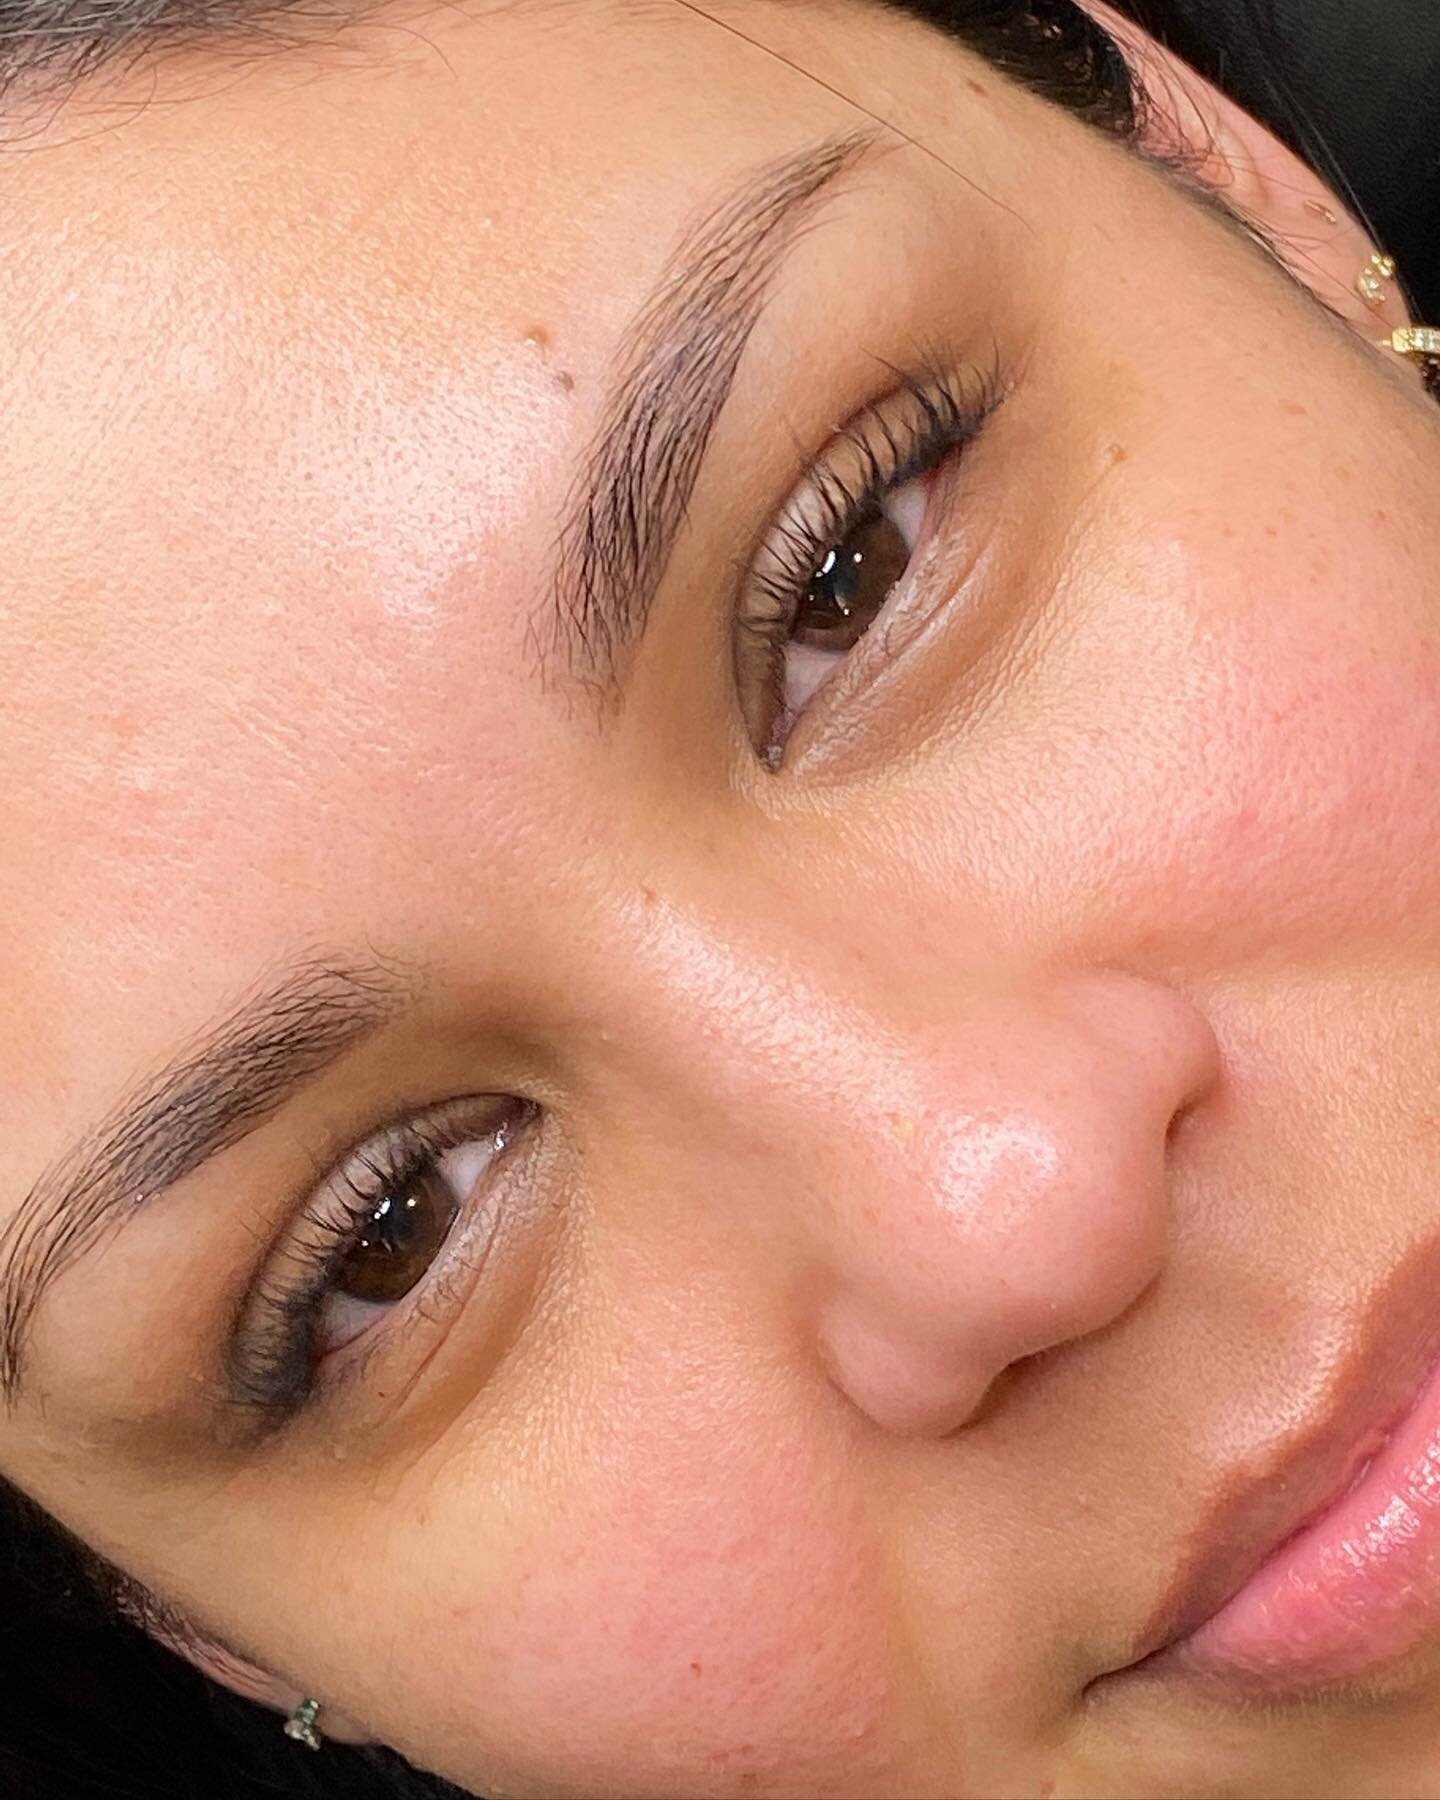 ONE SESSION HEALED -&gt; TOUCHED UP
Here&rsquo;s a perfect example of how soft permanent brows can heal. Permanent brows may be intimidating at first, but they heal more natural looking than tinted/laminated eyebrows. You can always opt to stay on th